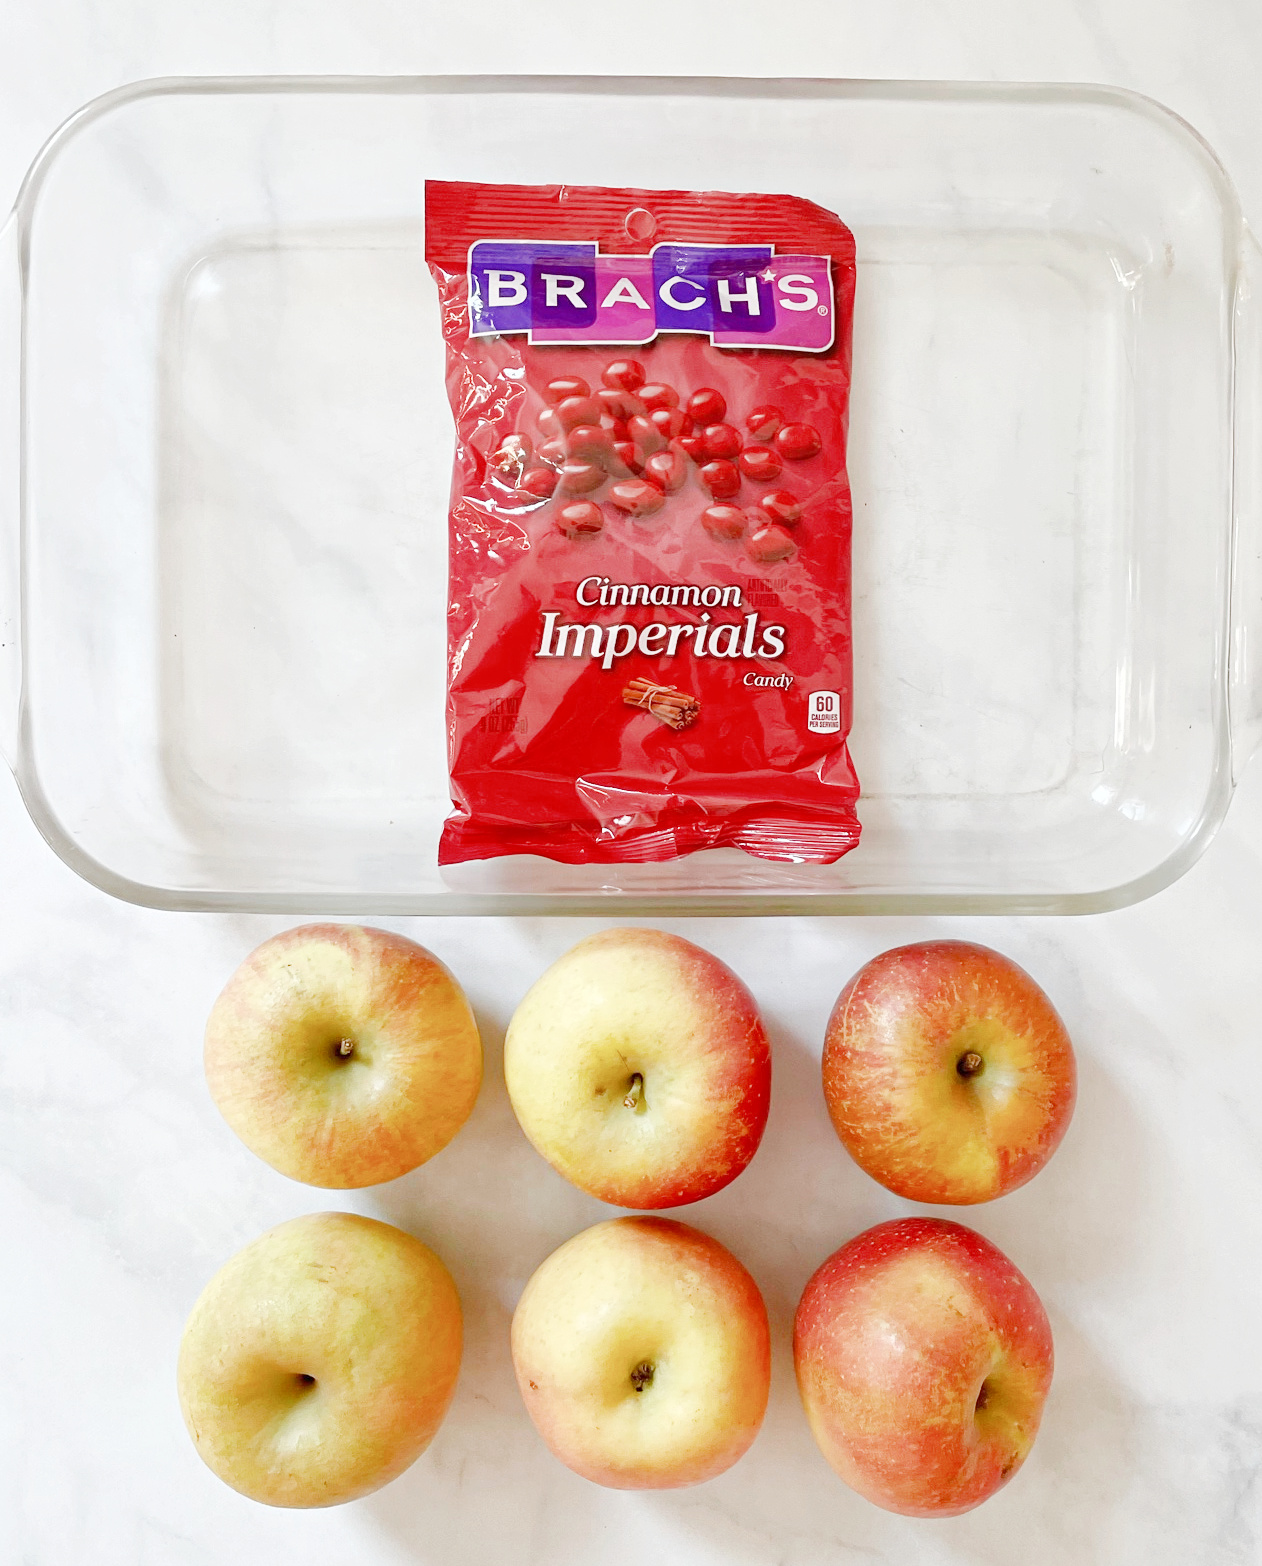 Red Hots Baked Apples